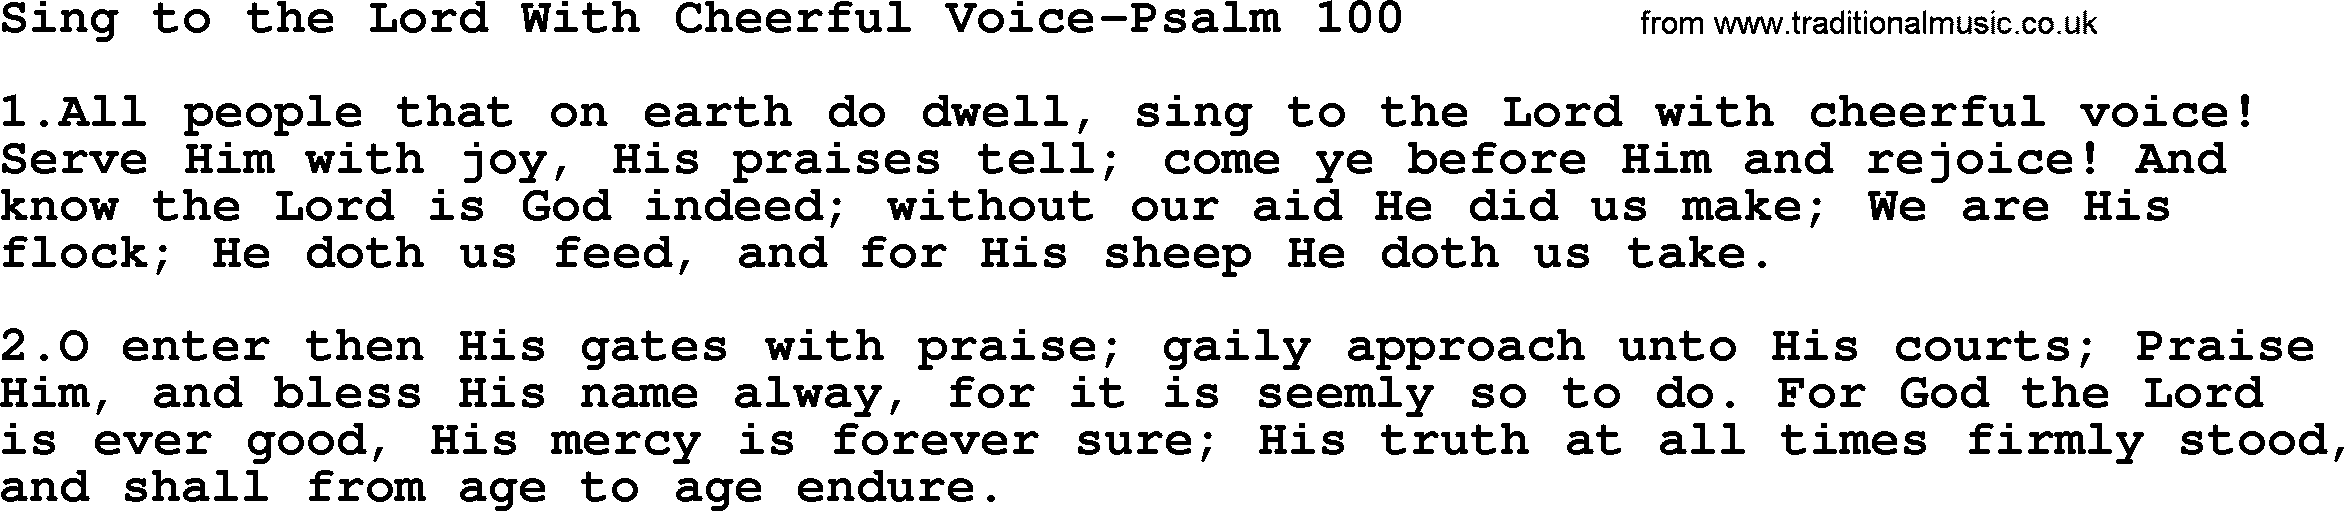 Hymns from the Psalms, Hymn: Sing To The Lord With Cheerful Voice-Psalm 100, lyrics with PDF